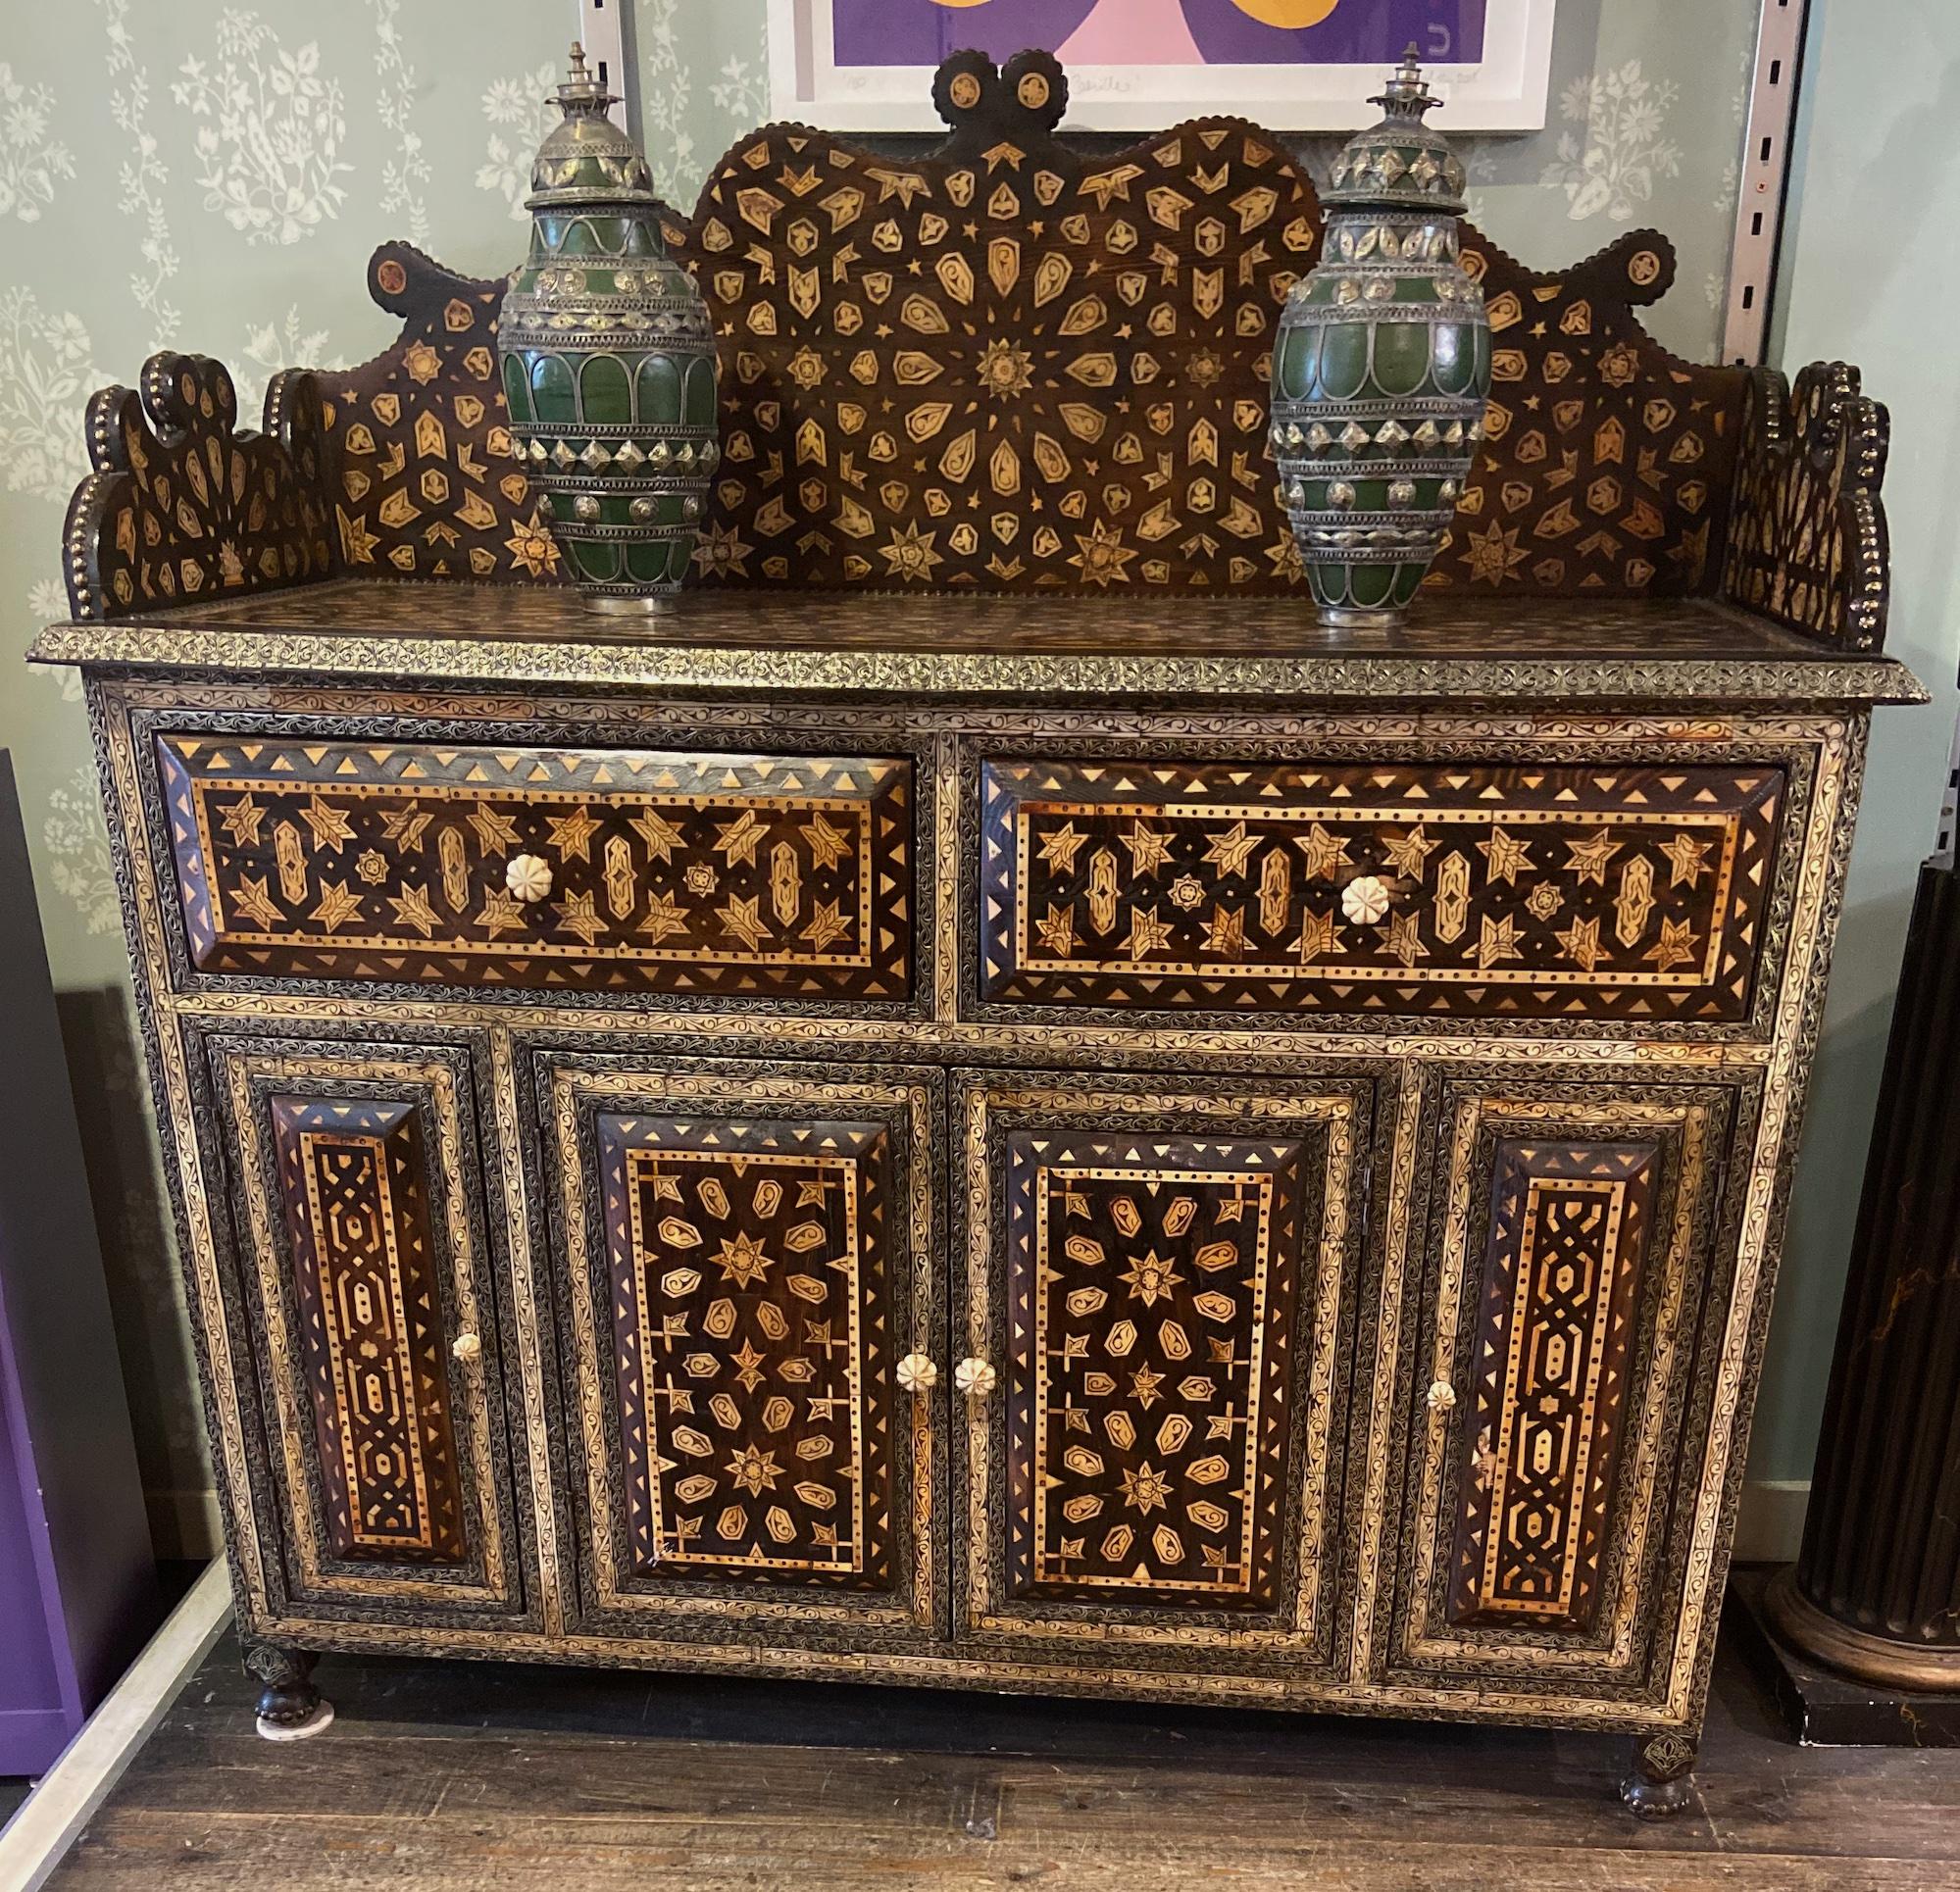 20th Century Rare and Exquisite Antique Syrian Credenza Cabinet Sideboard For Sale